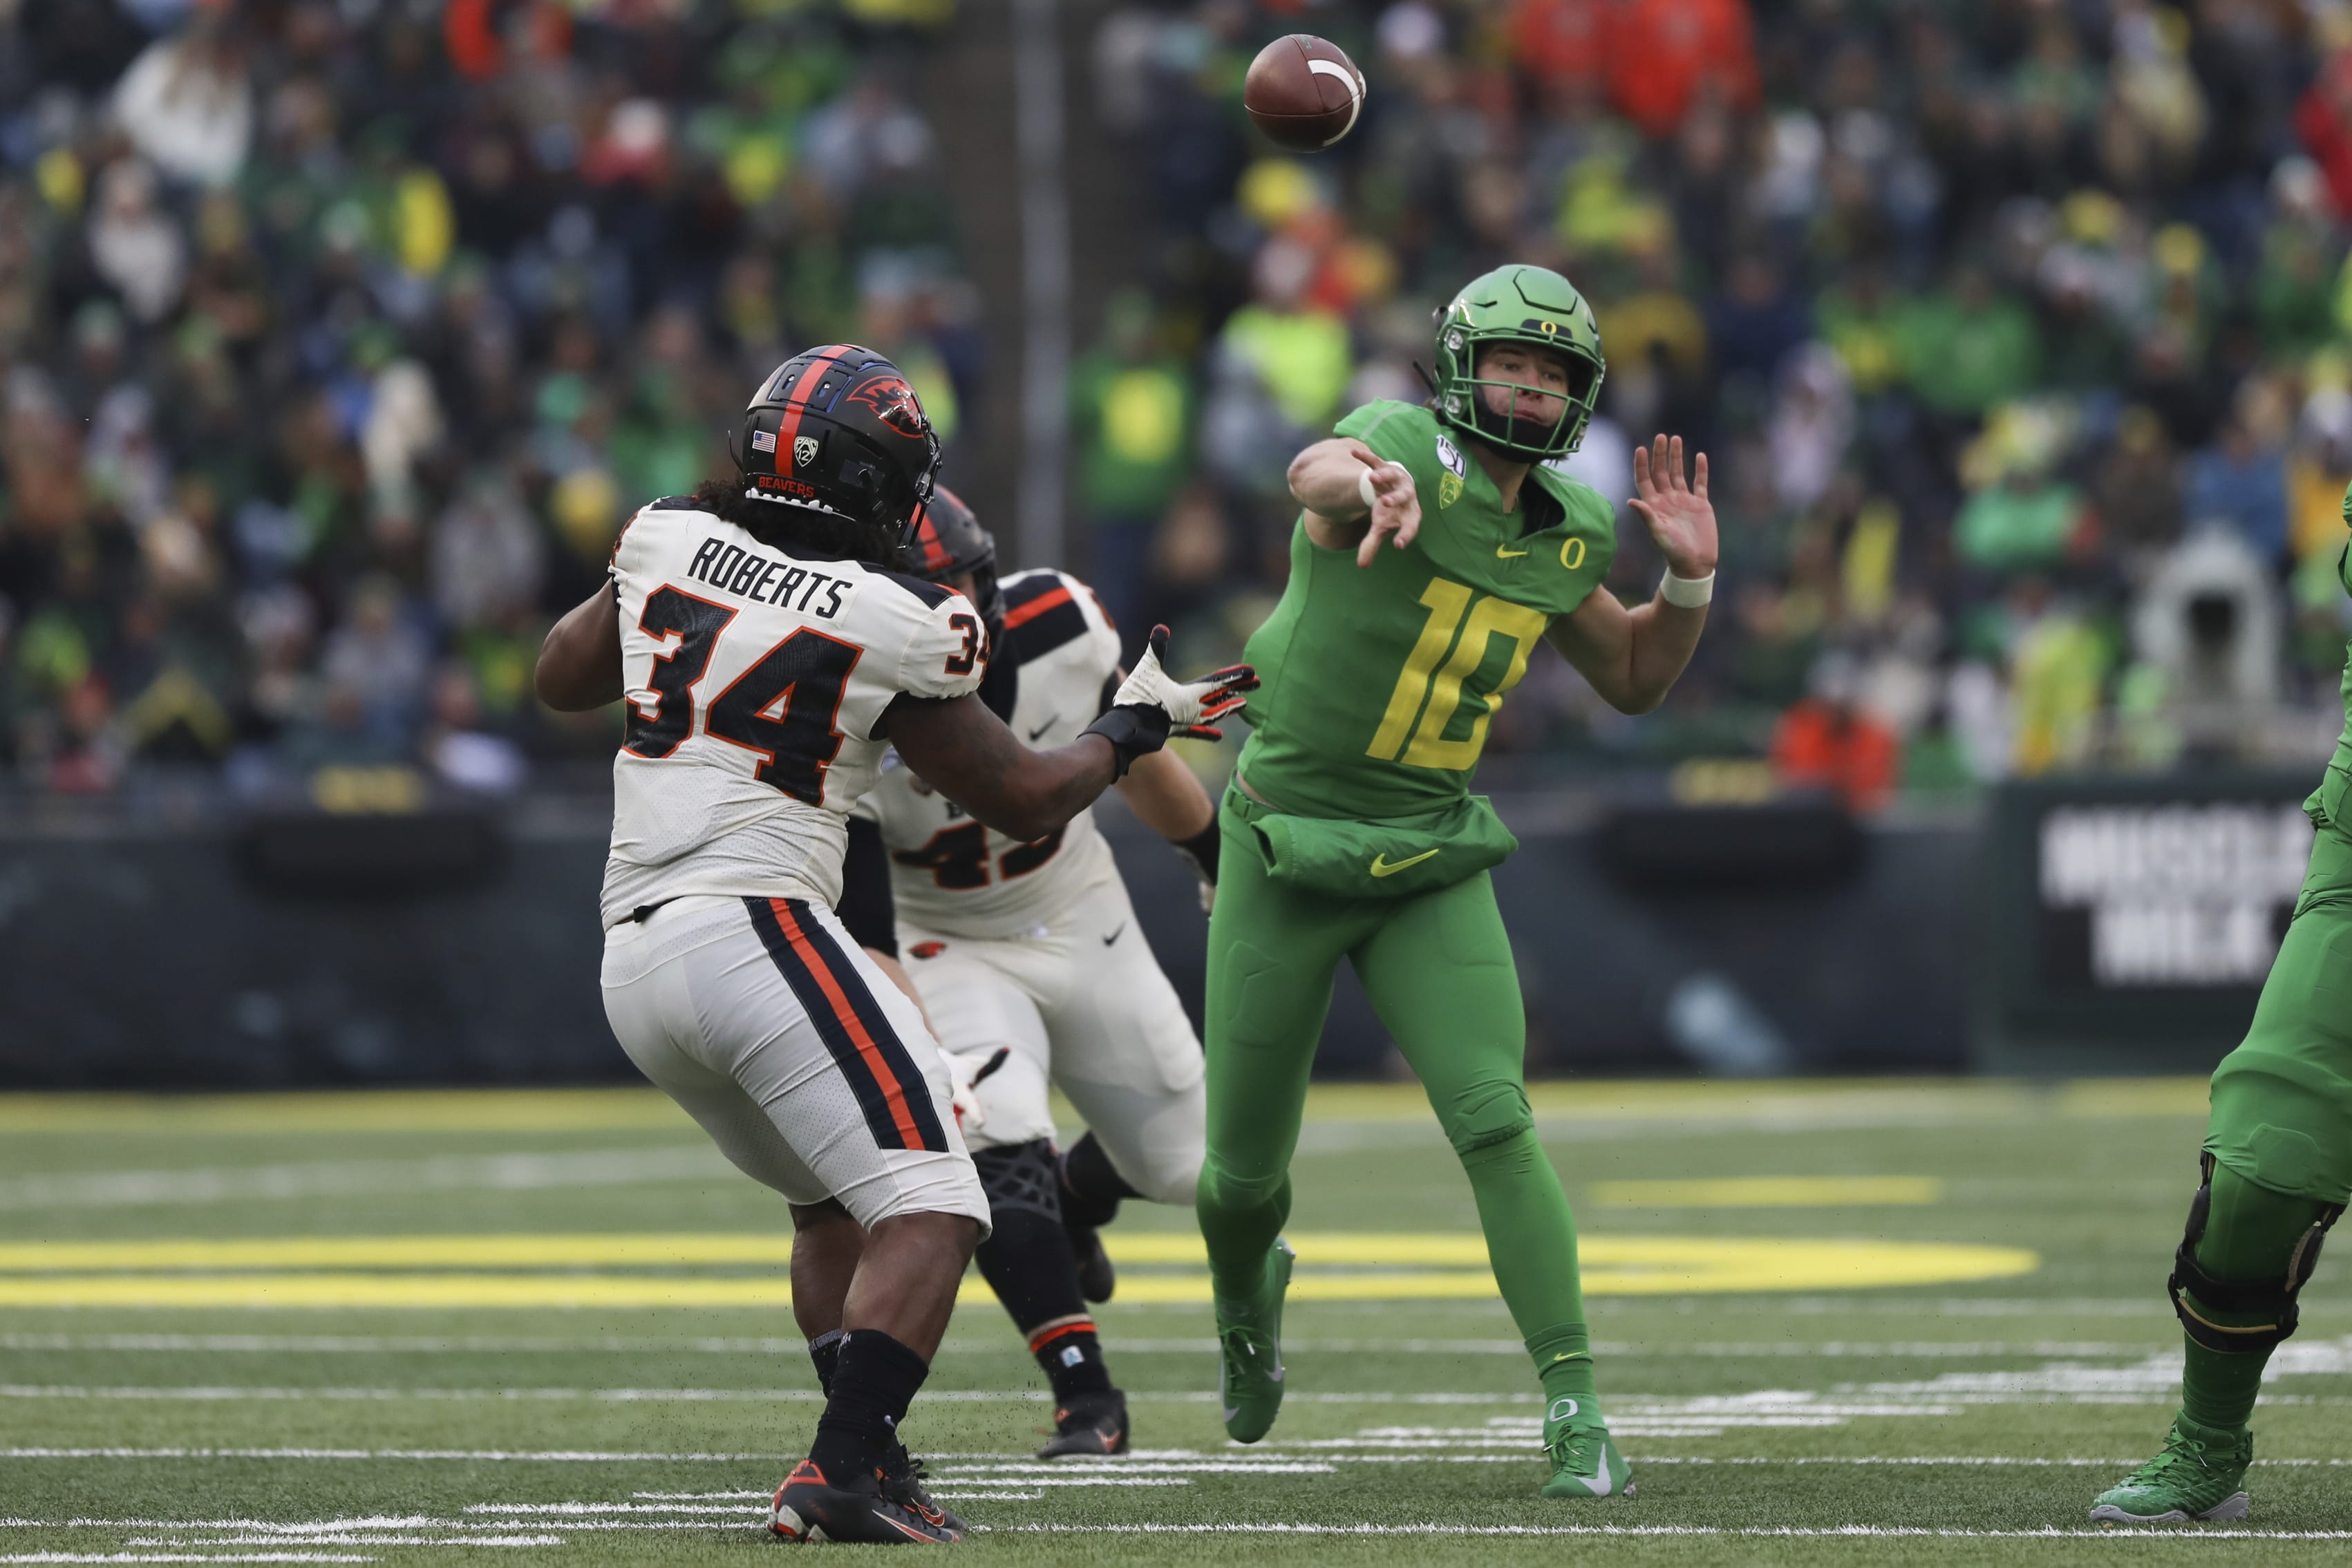 Oregon quarterback Justin Herbert (10) throws a pass away from Oregon State inside linebacker Avery Roberts (34) and defensive lineman Simon Sandberg (45) during the second half of an NCAA college football game in Eugene, Ore., Saturday, Nov. 30, 2019.